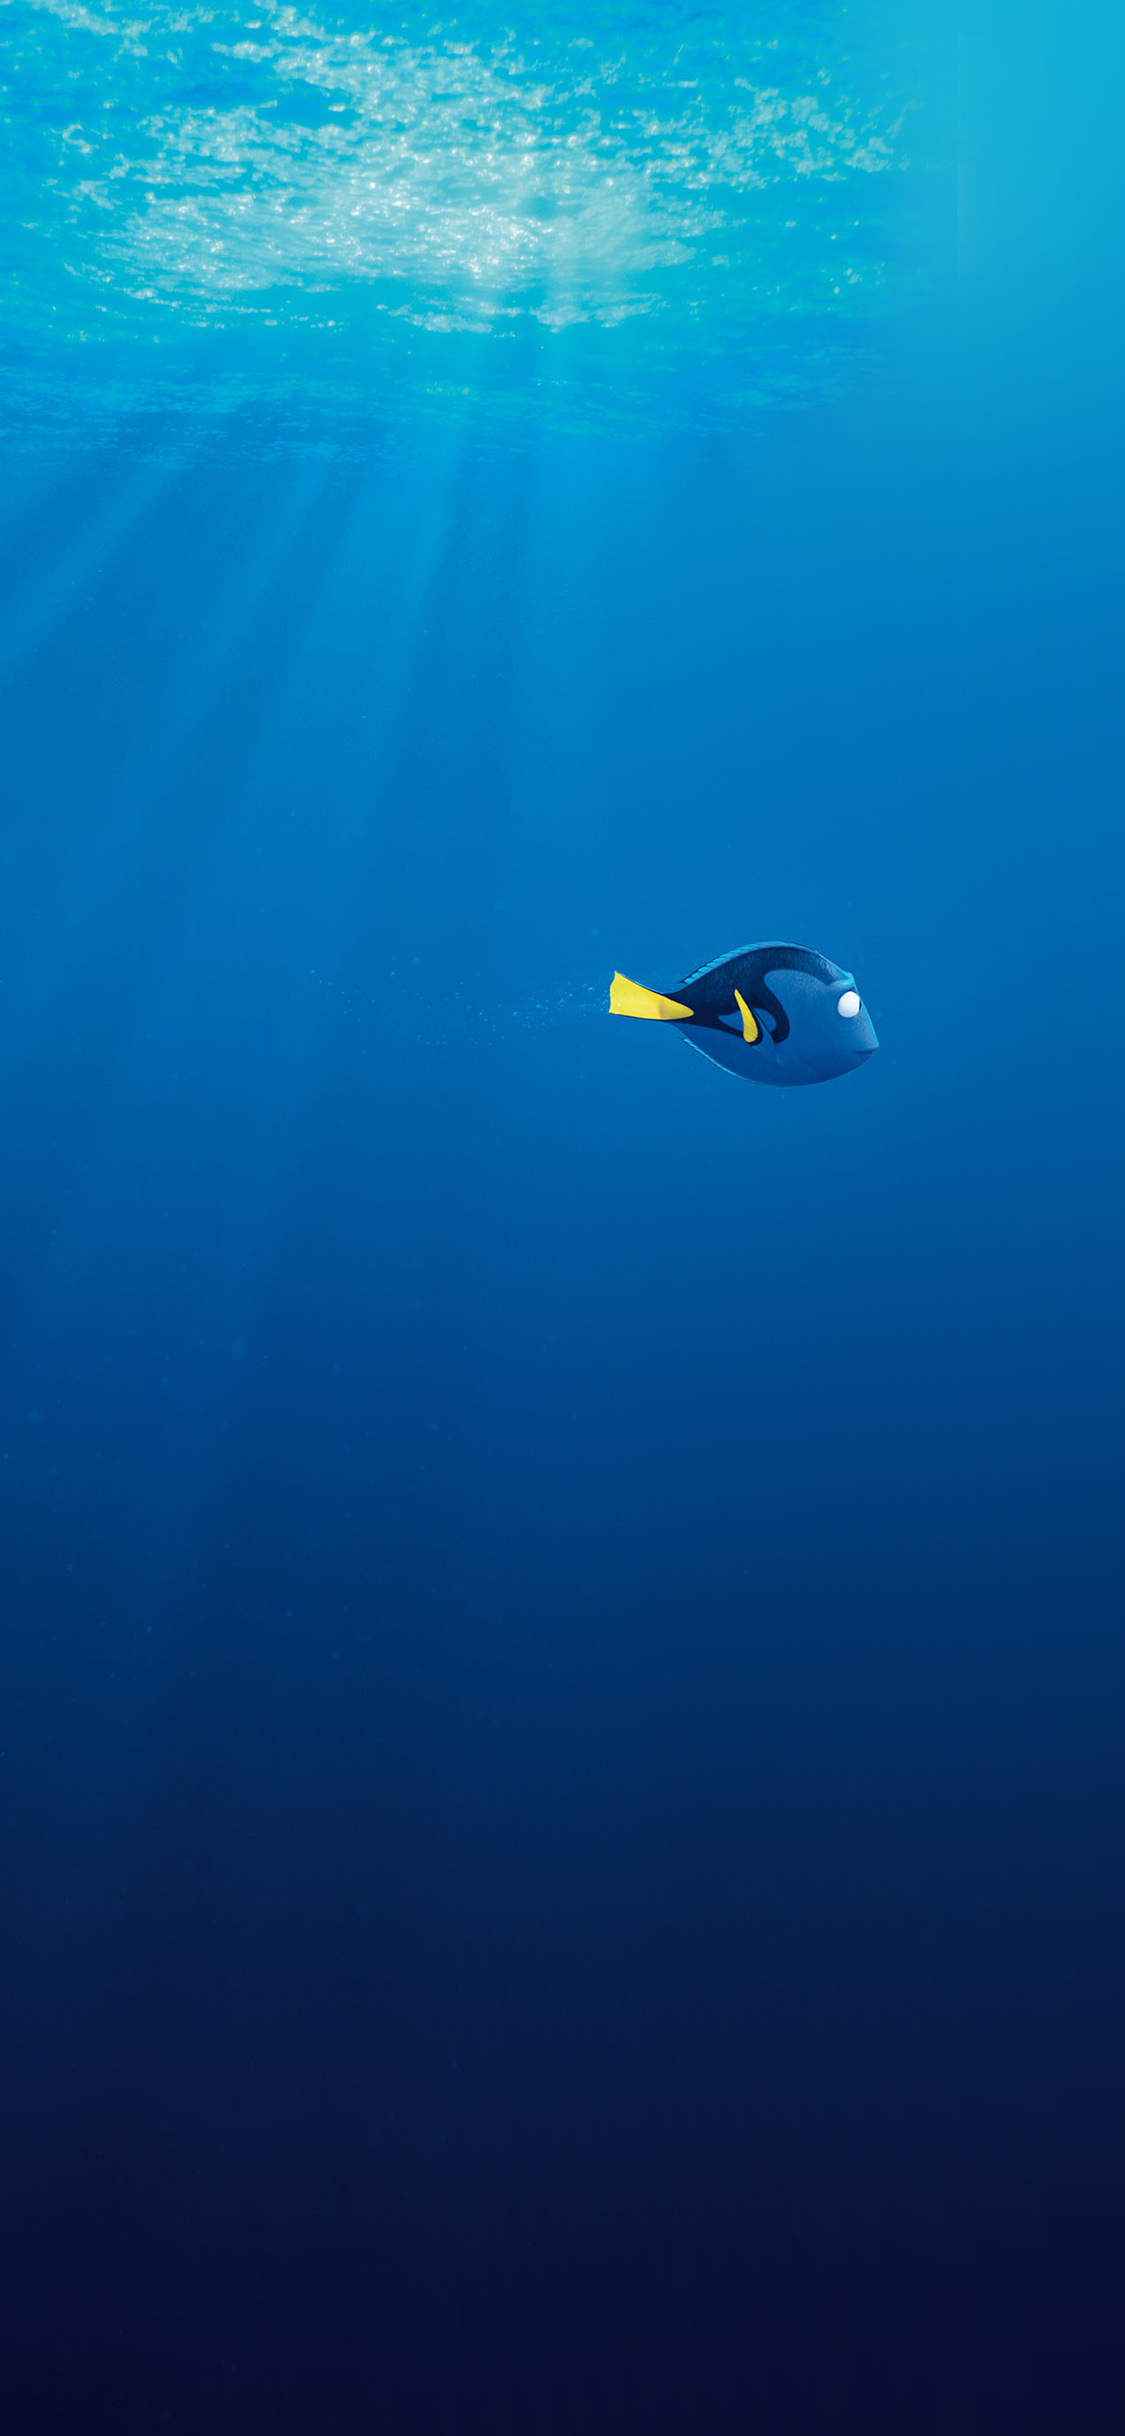 free downloads Finding Dory